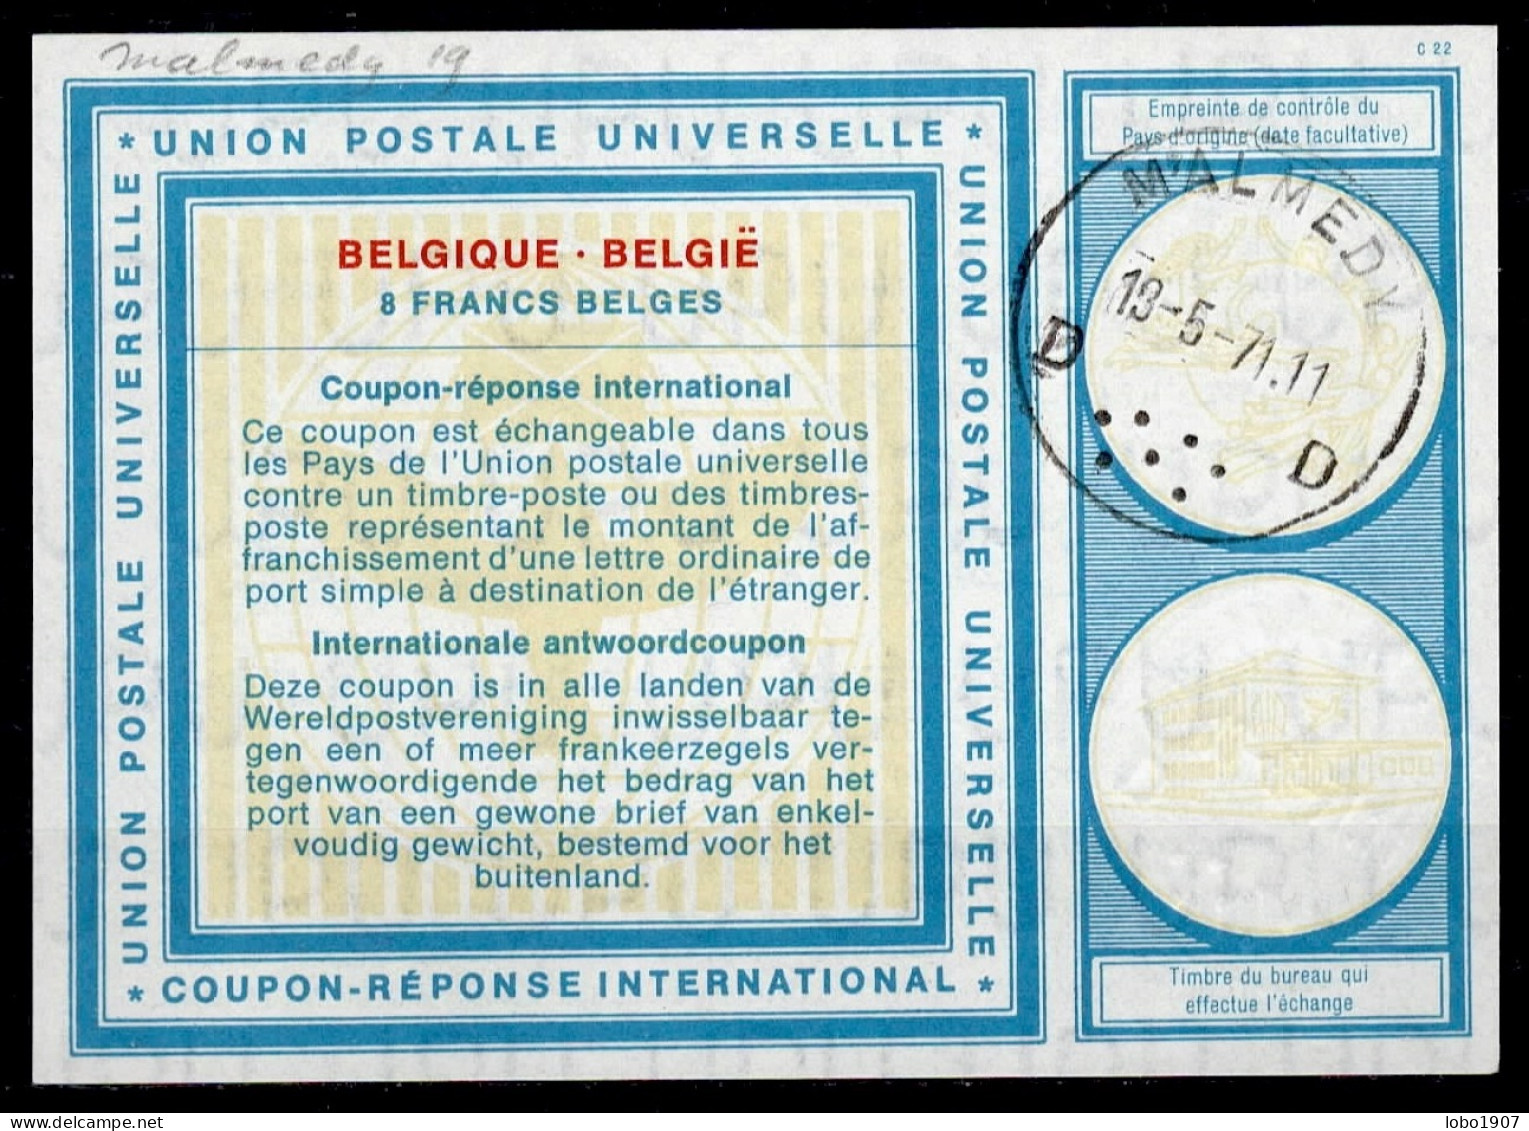 MALMEDY 13.05.71    BELGIQUE BELGIE BELGIUM  Vi19  8 FRANCS BELGES Int. Reply Coupon Reponse Antwortschein IAS IRC - International Reply Coupons